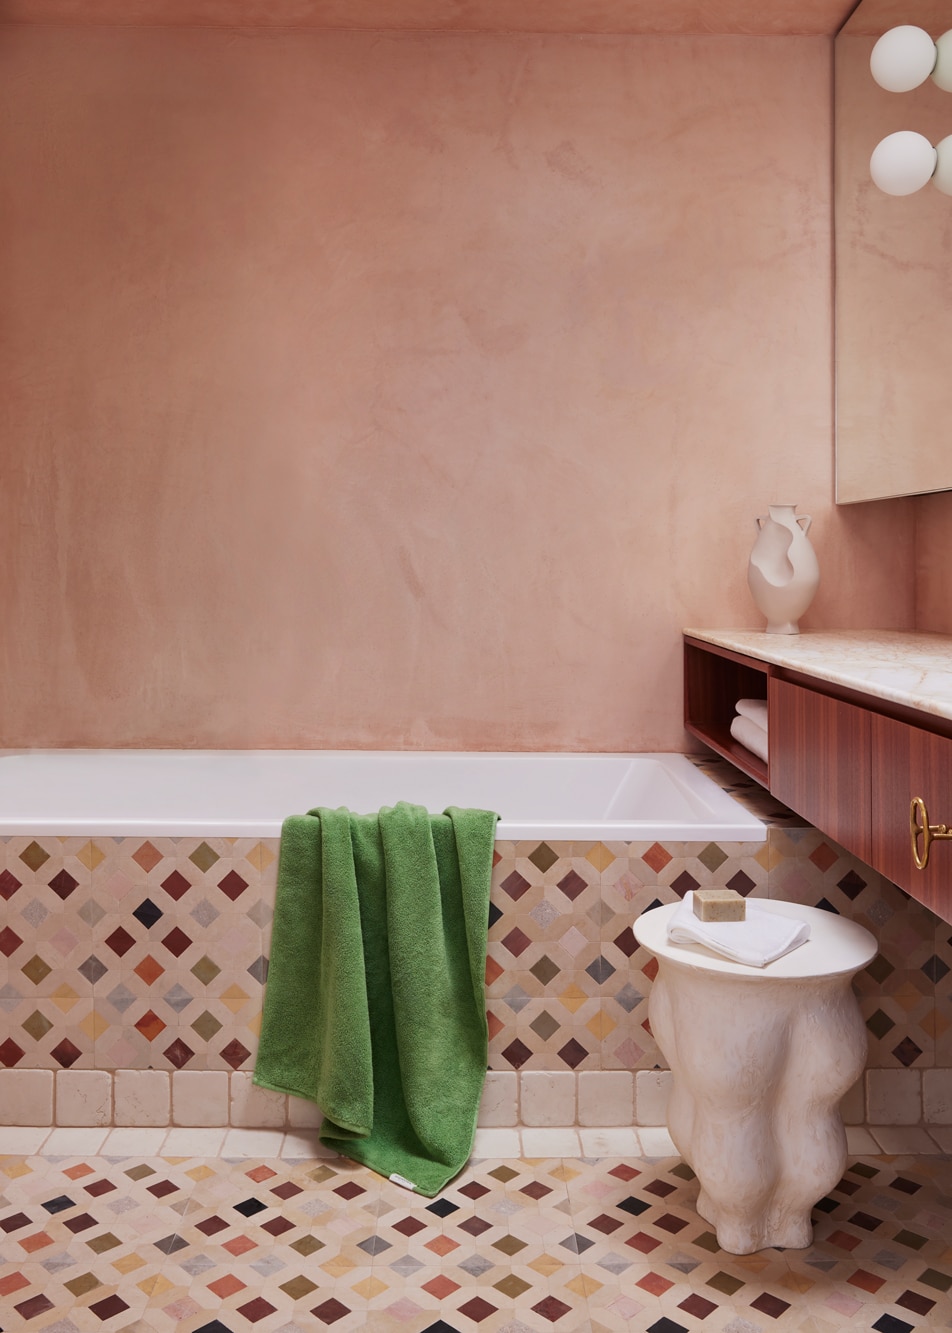 A pink bathroom with colourful diamond floor tiles. A green towel is draped over the side of the bathtub.